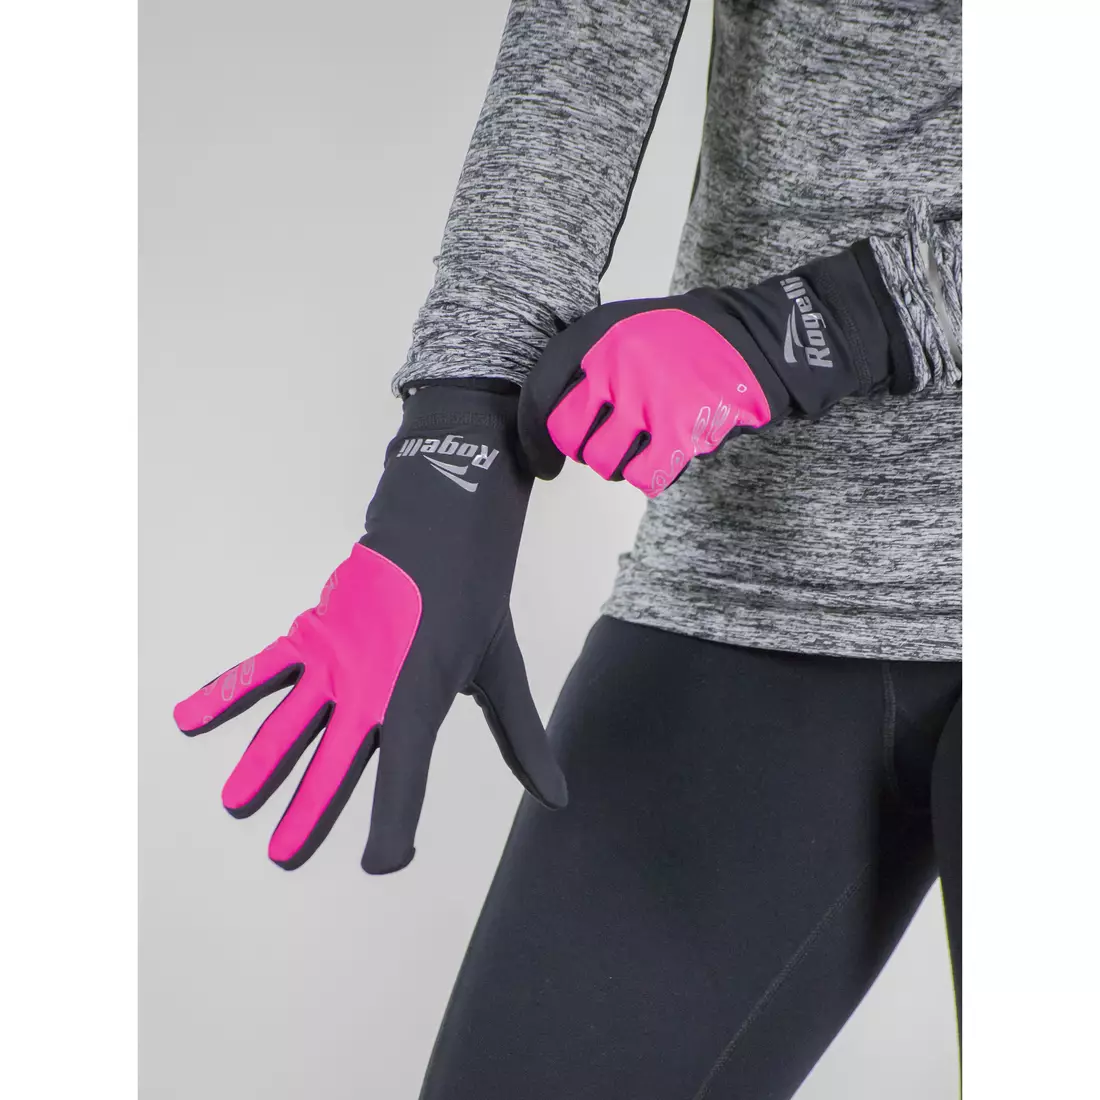 ROGELLI RUN 890.004 TOUCH Women's running gloves, black and pink